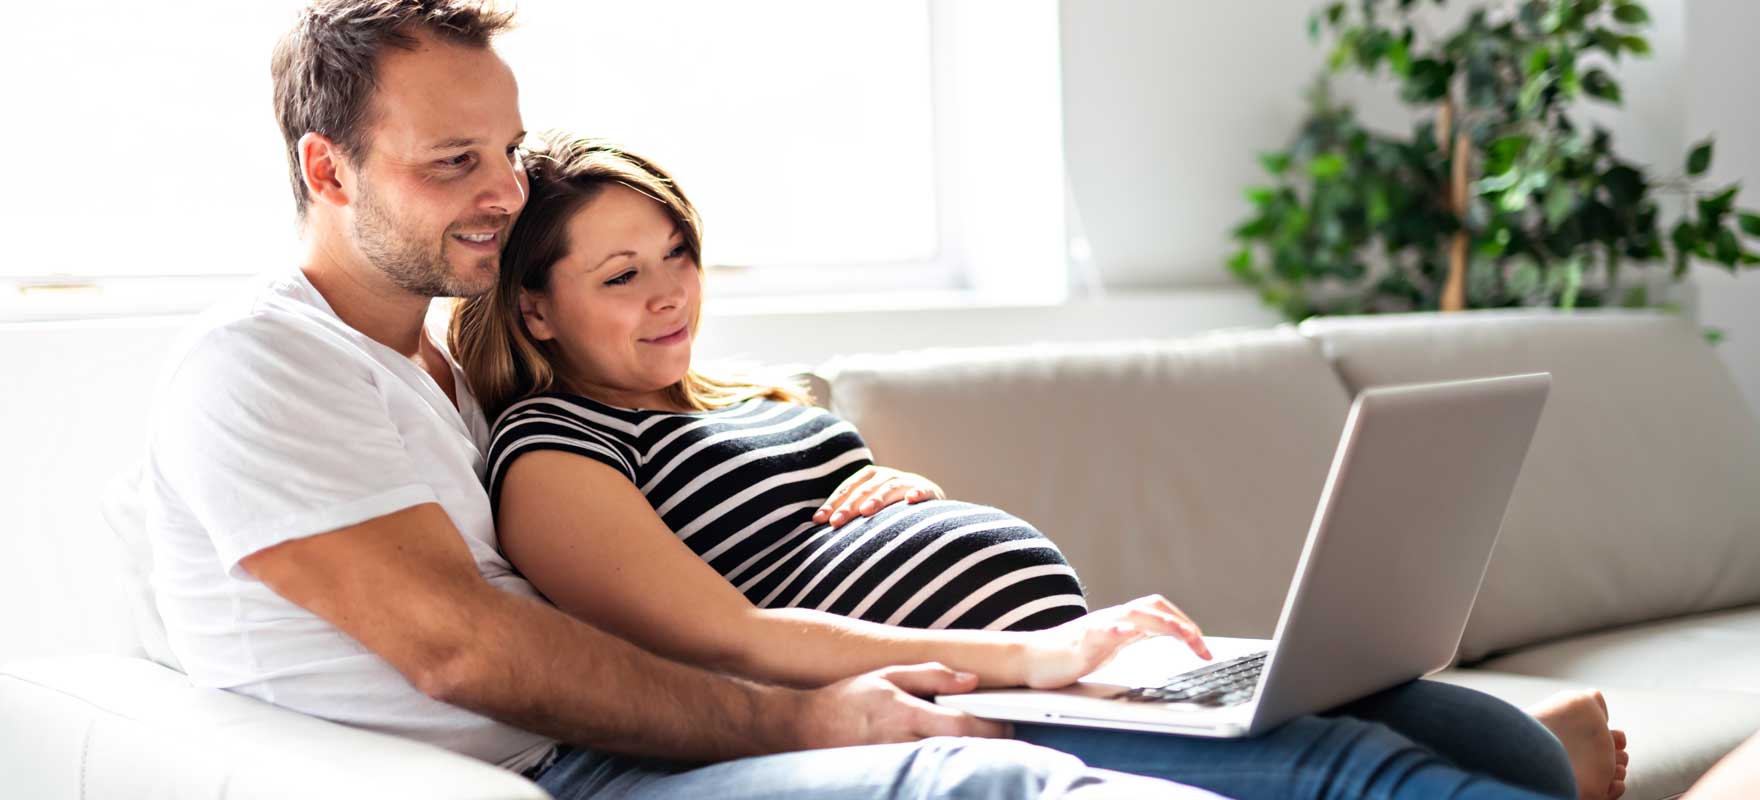 pregnant couple looking at a computer screen while sitting together on a couch